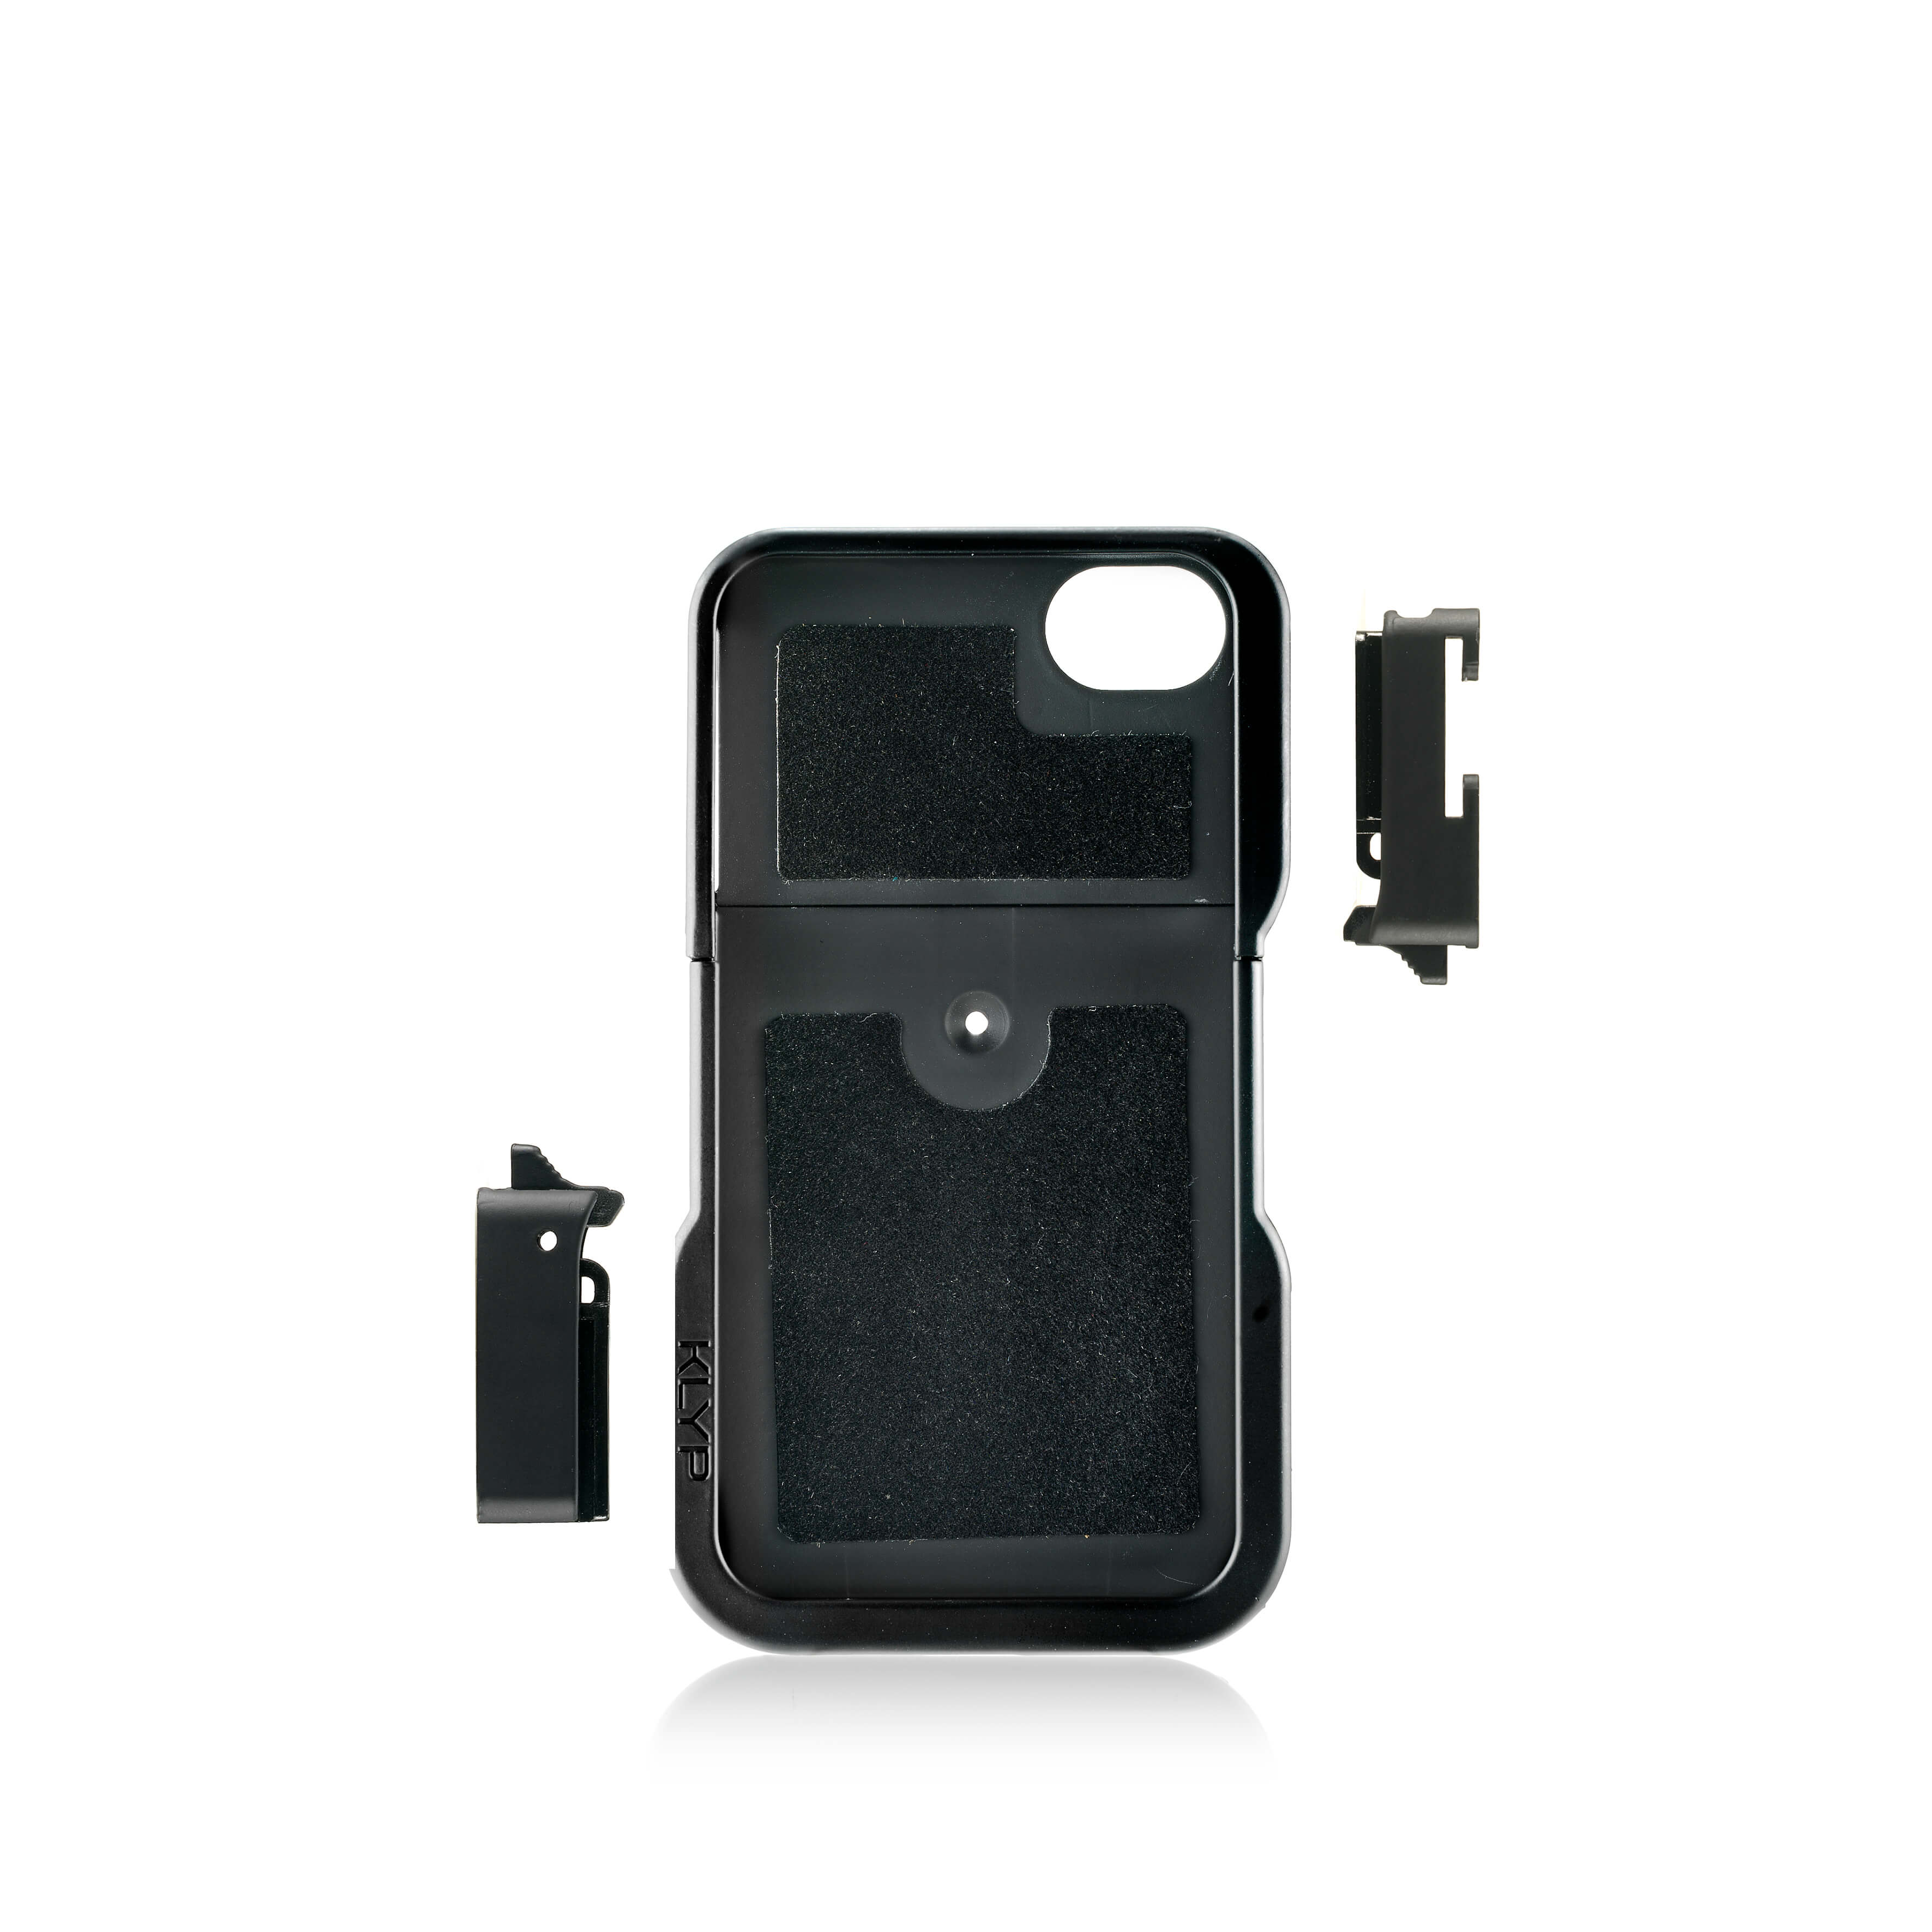 Mobile Phone Cover KLYP for i Phone 4/4S with 2 Adaptable Op